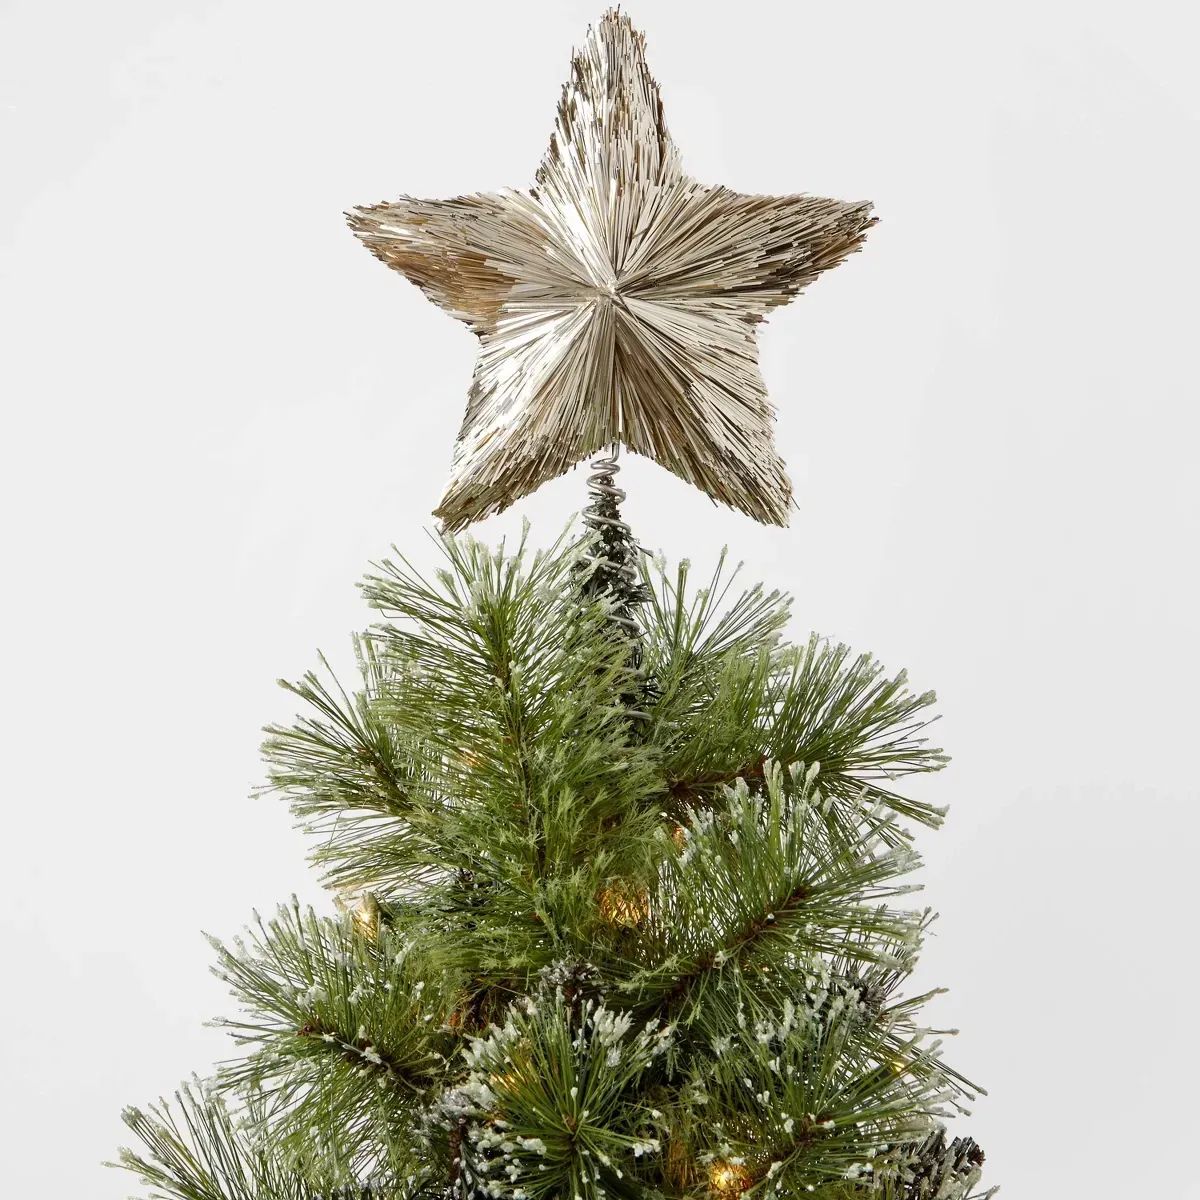 The 25 Best Christmas Tree Topper Ideas You Can Buy or DIY - Brit + Co